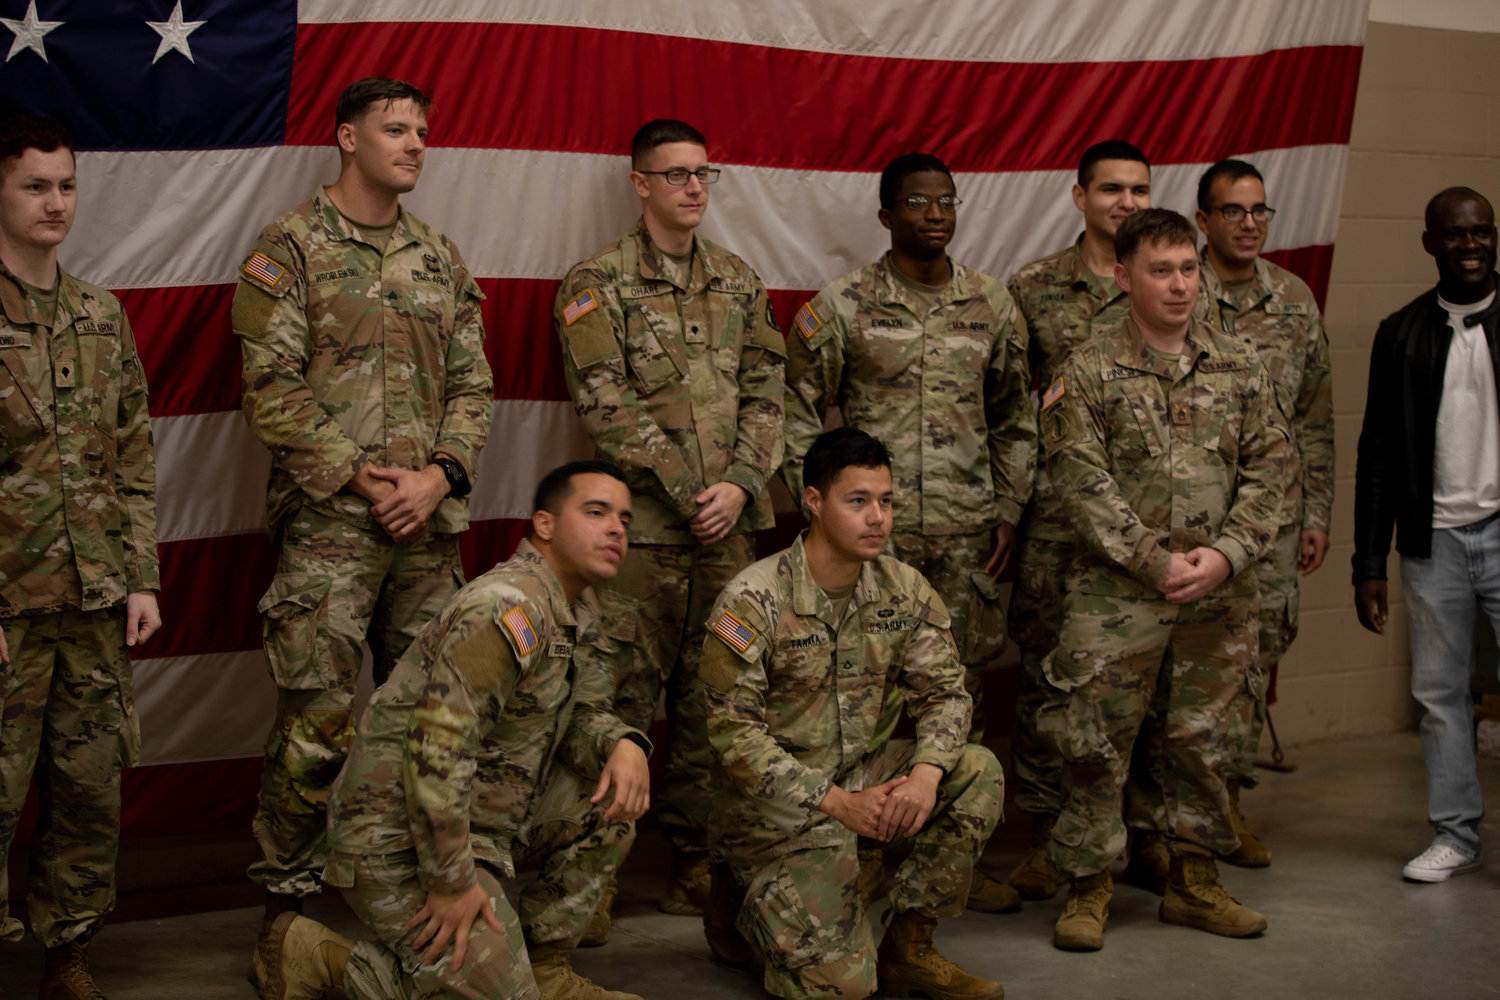 Soldiers assigned to Headquarters and Headquarters Battalion, 18th Airborne Corps arrive on Fort Bragg on Friday. The soldiers completed a nine-month deployment to Germany in support of the NATO alliance.